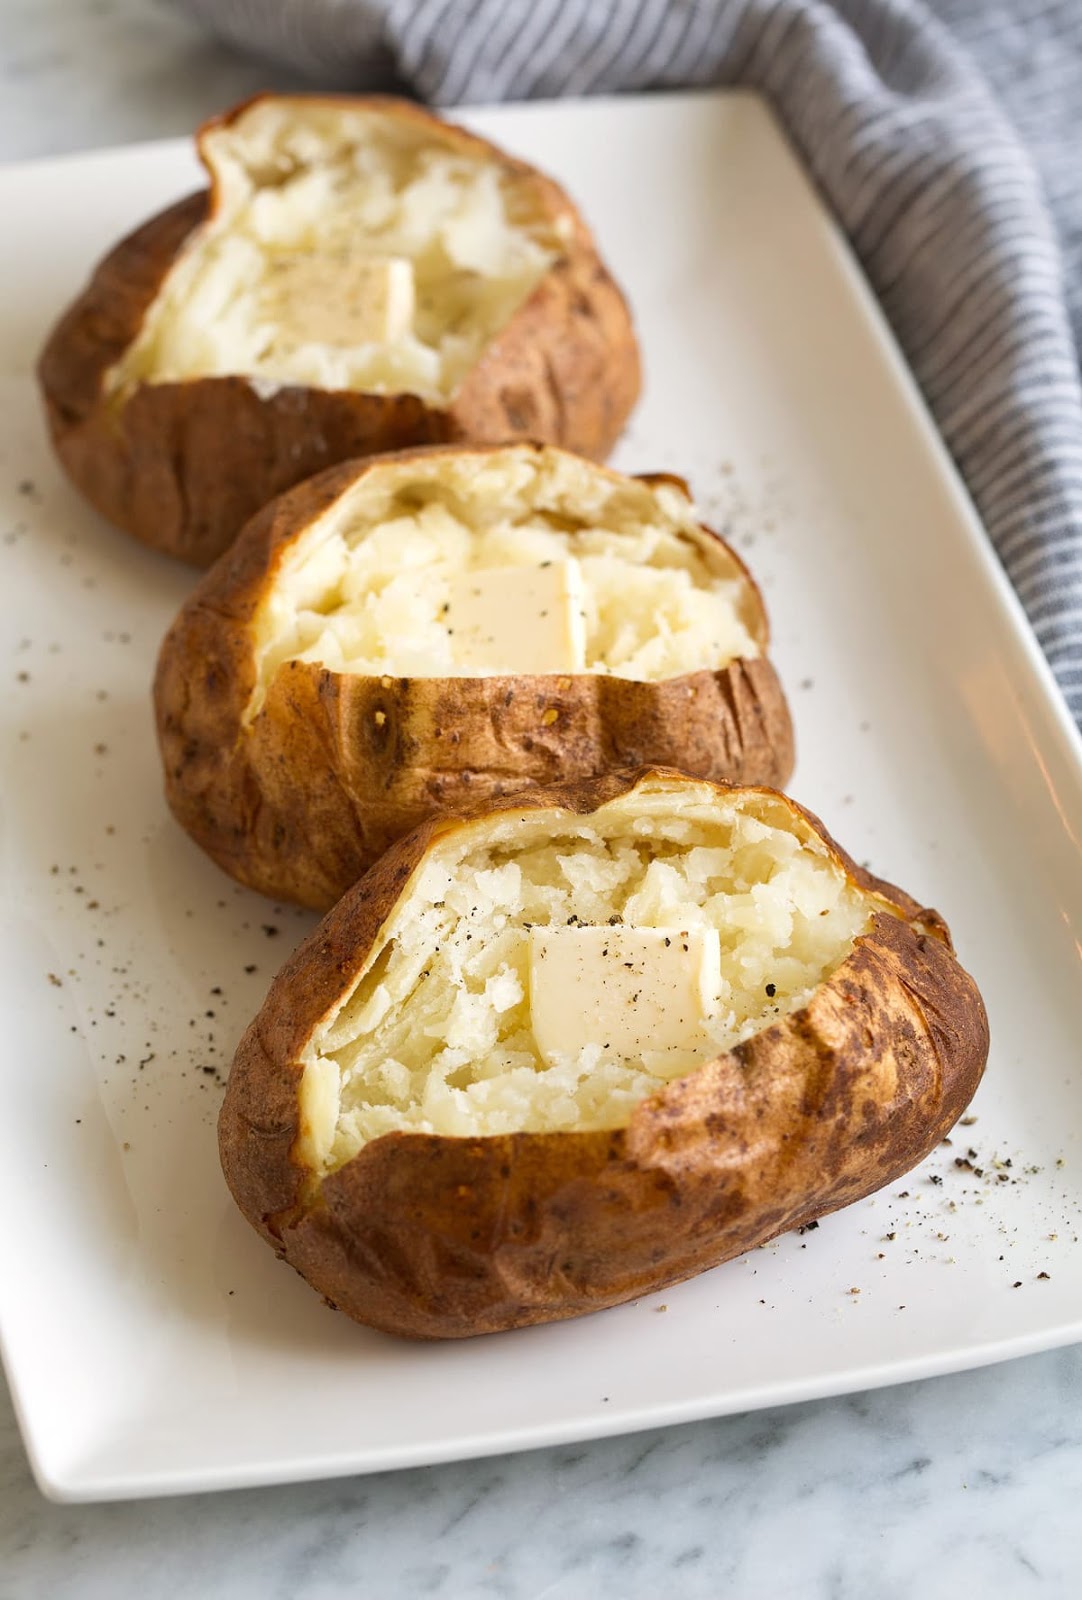 Passionate Home Cooking: Baked patatoes